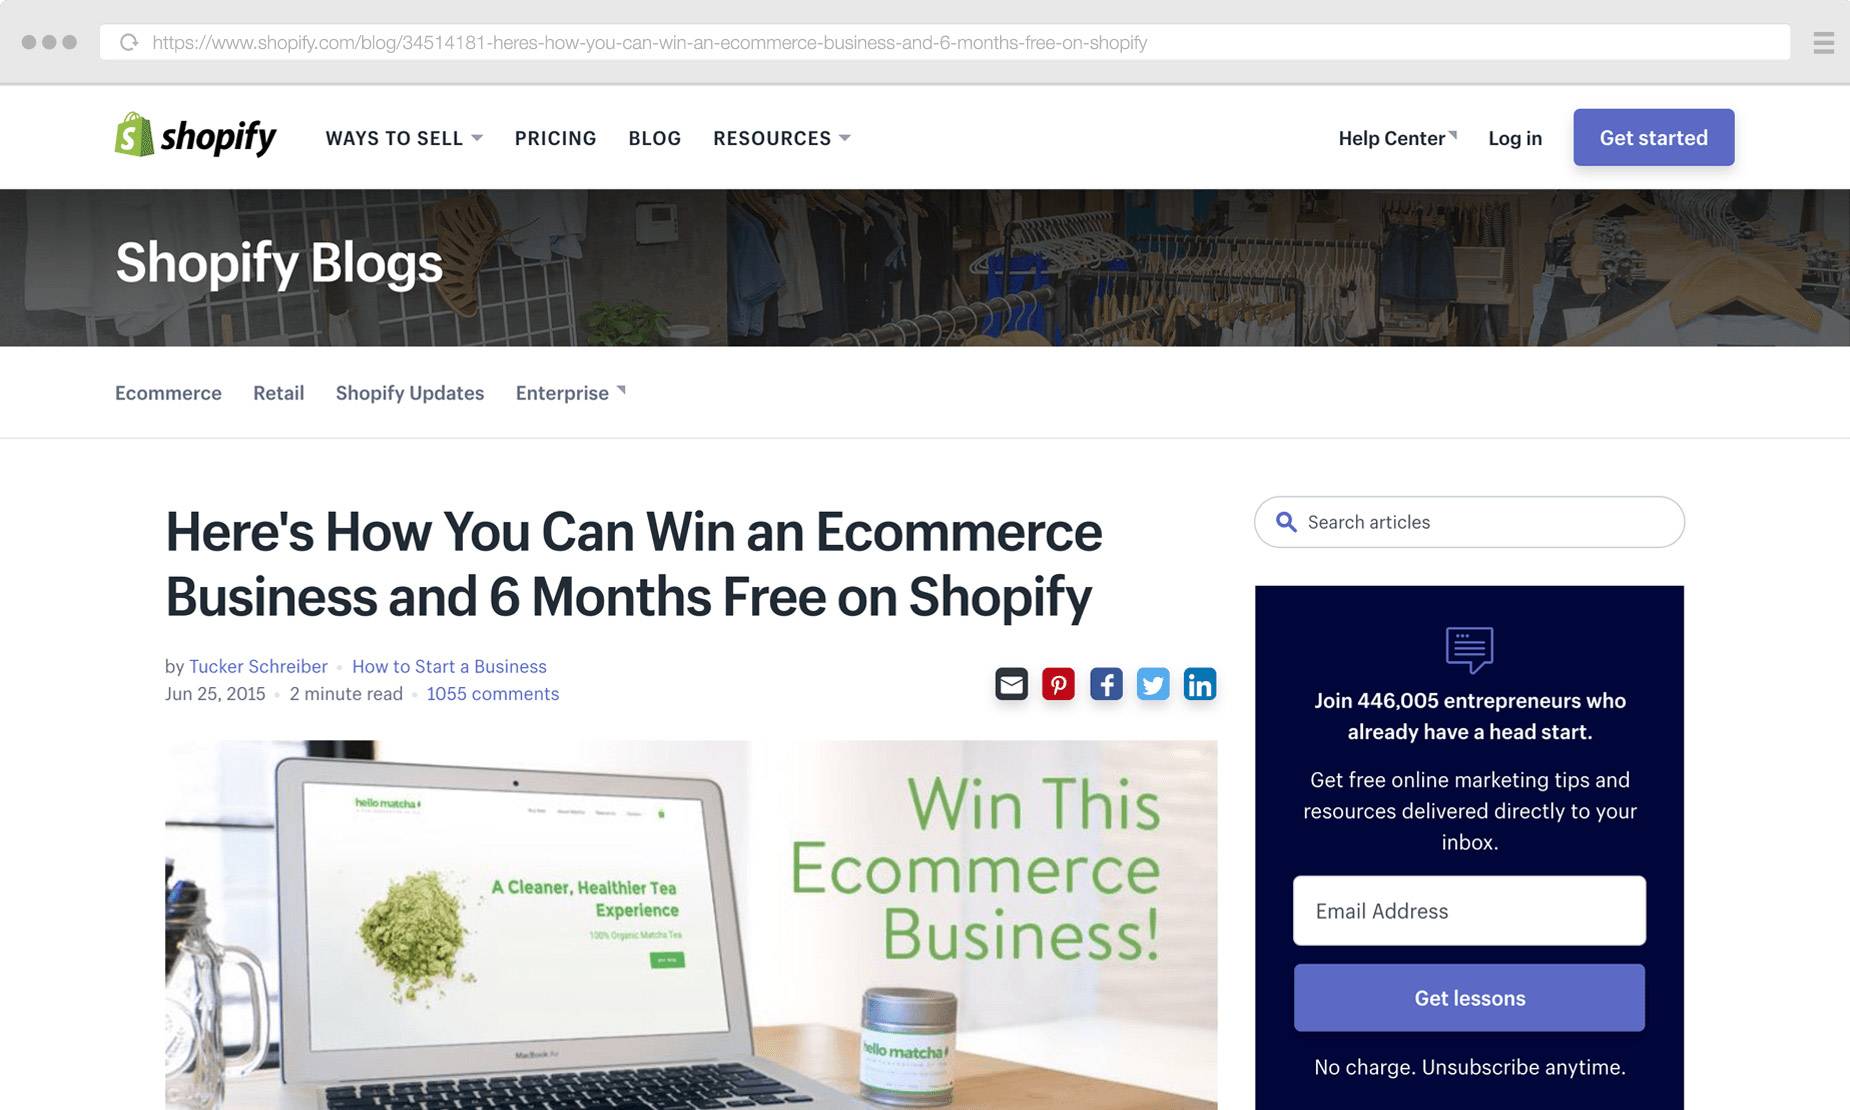 Win an E-Commerce Business Blog Post from Shopify Blogs